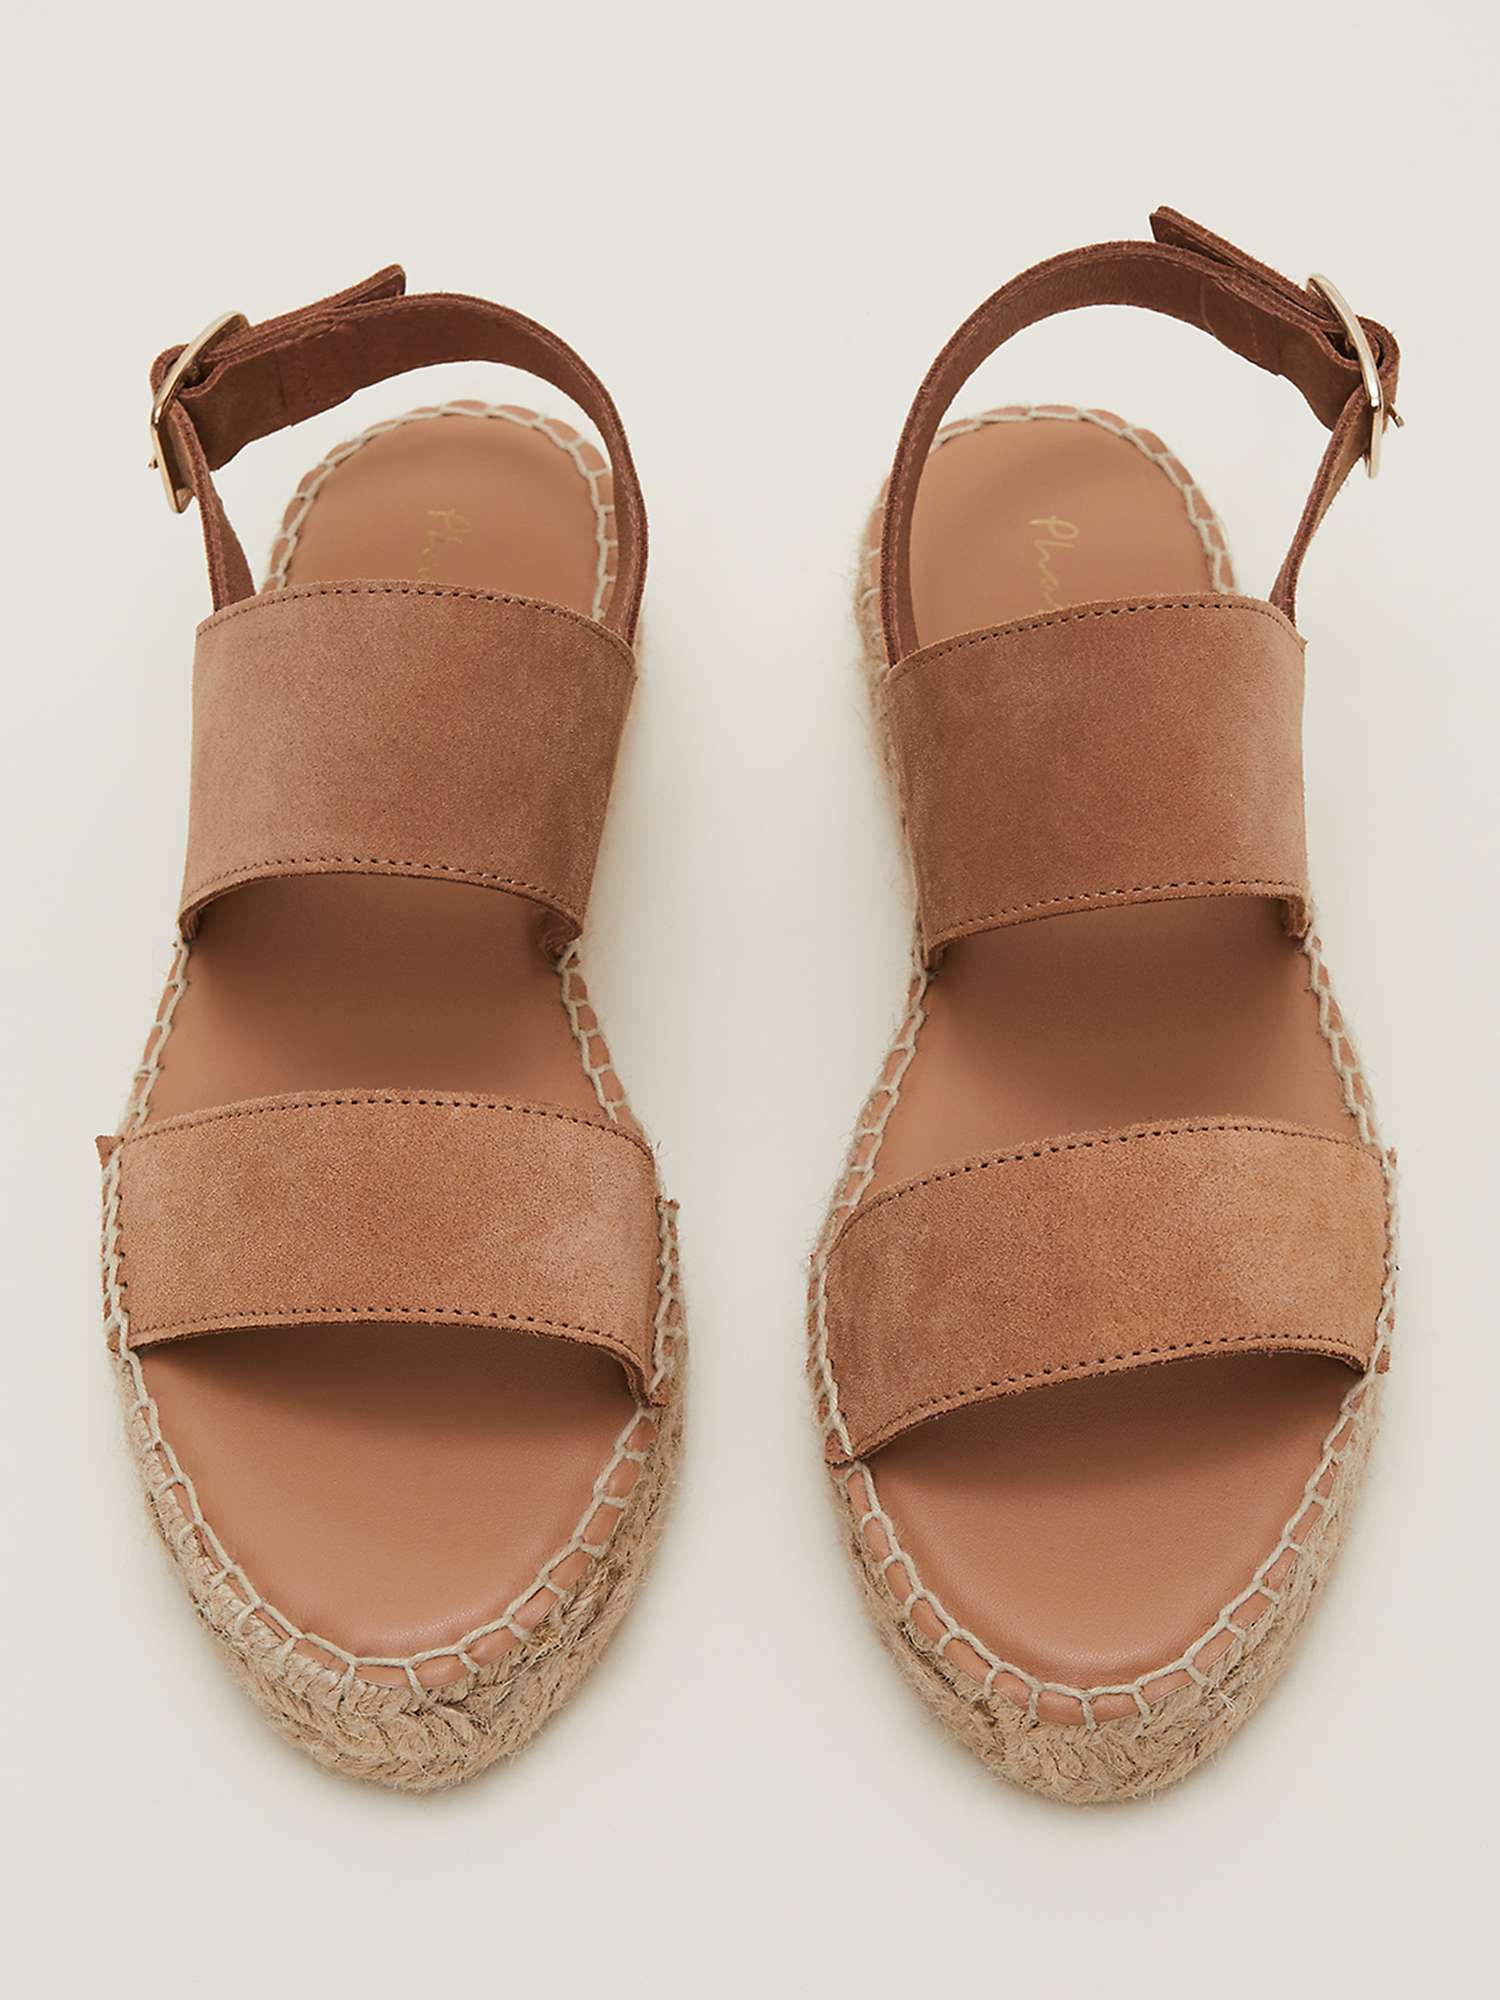 Buy Phase Eight Suede Flat Espadrille Sandals, Tan Online at johnlewis.com